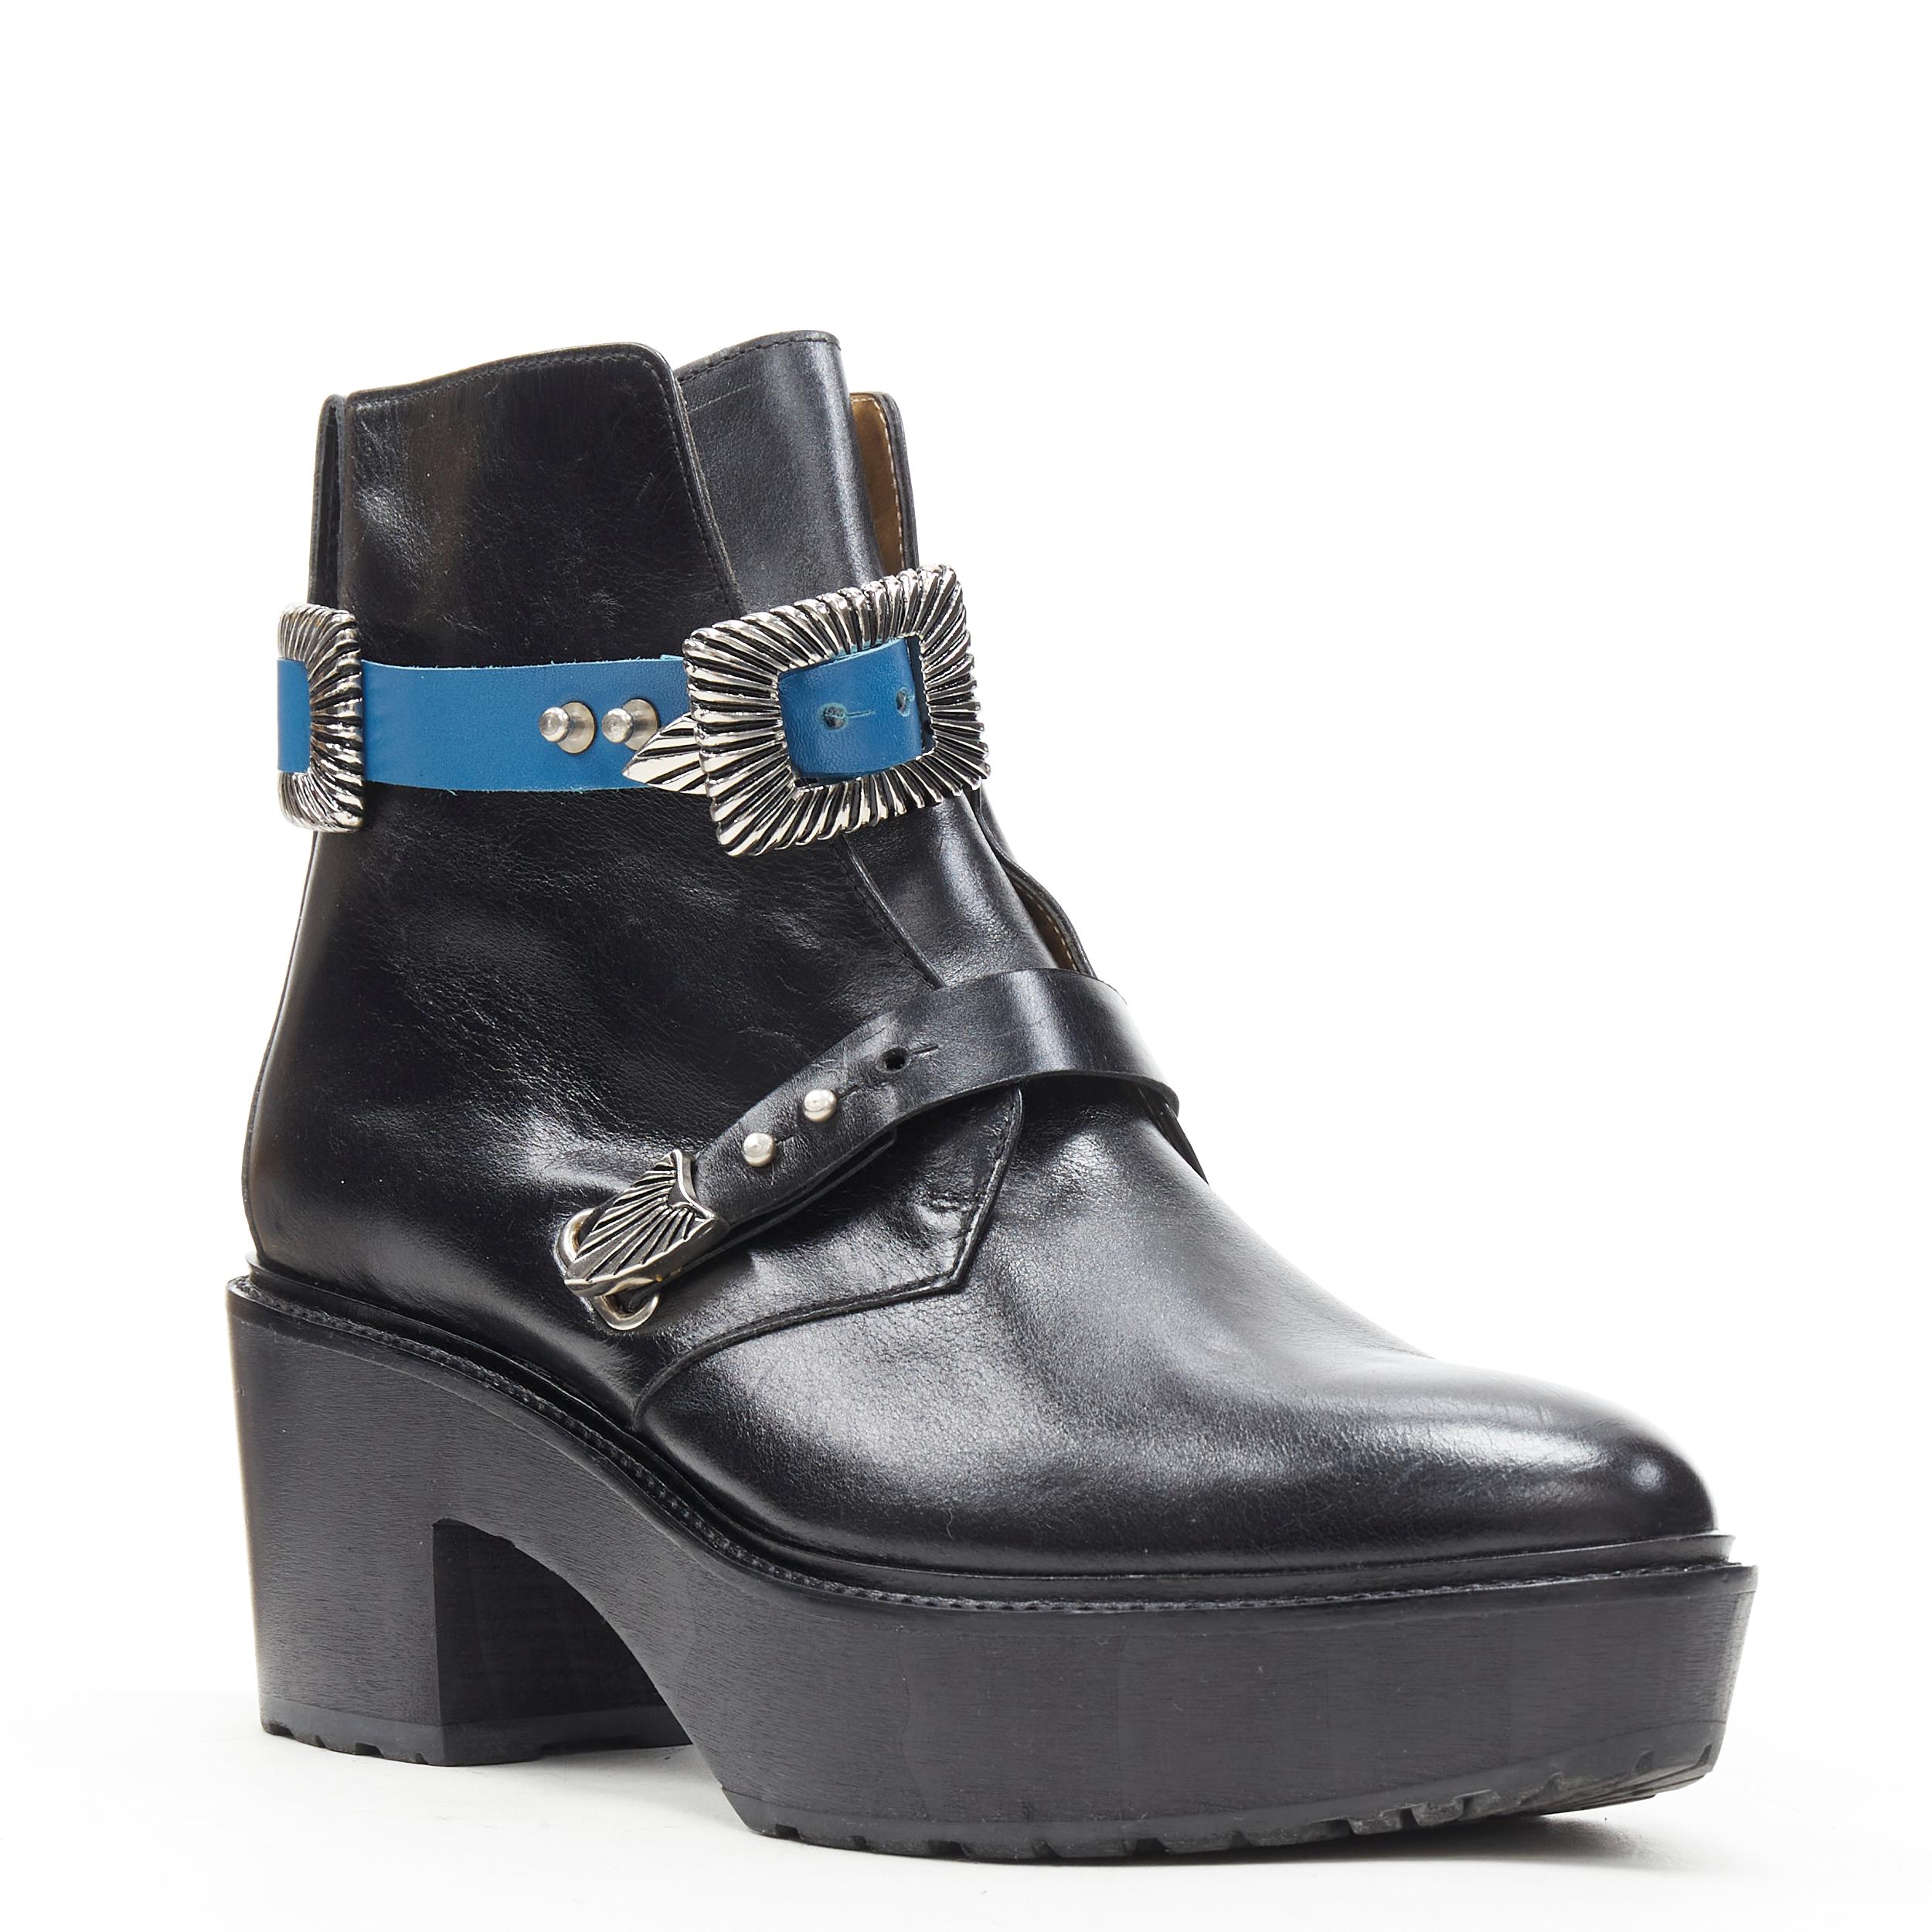 TOGA PULLA black leather western silver buckle blue platform ankle bootie EU38 
Reference: WEYN/A00373 
Brand: Toga Pulla 
Material: Leather 
Color: Black 
Pattern: Solid 
Closure: Buckle 
Extra Detail: Ankle bootie. Leather. Blue and black leather